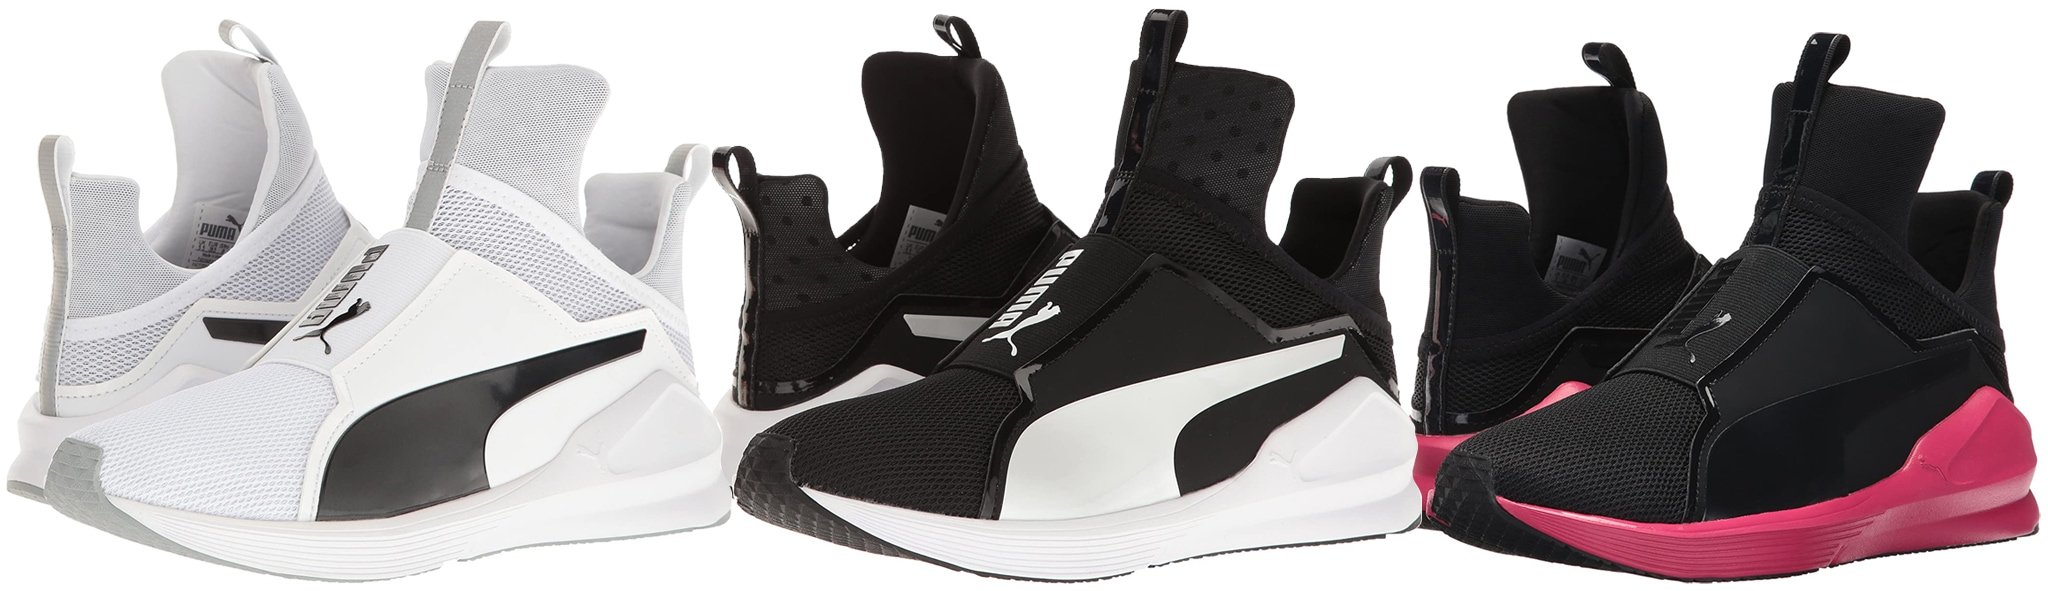 The Puma Fierce Core is a line of women's athletic shoes known for their sleek and stylish appearance